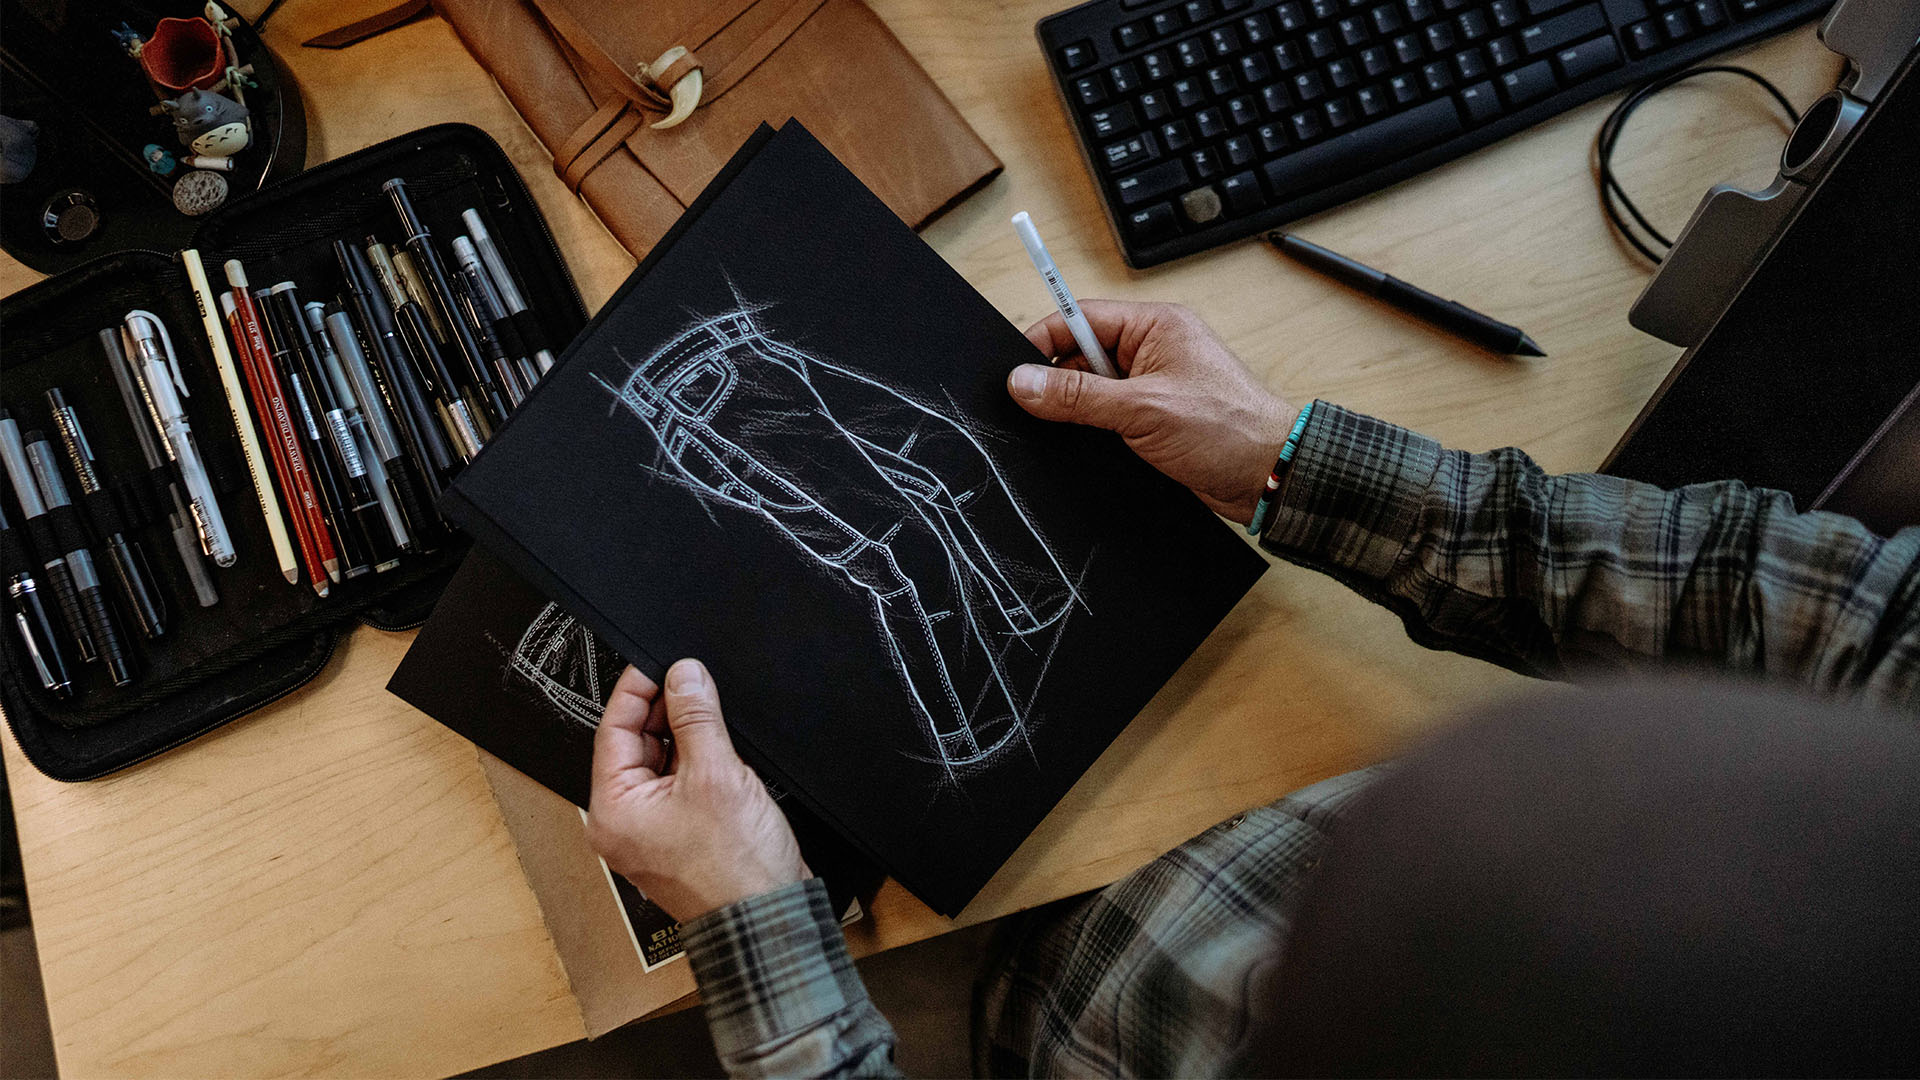 Manny's Illustrations of KUHL pants, drawings and a pencil case.